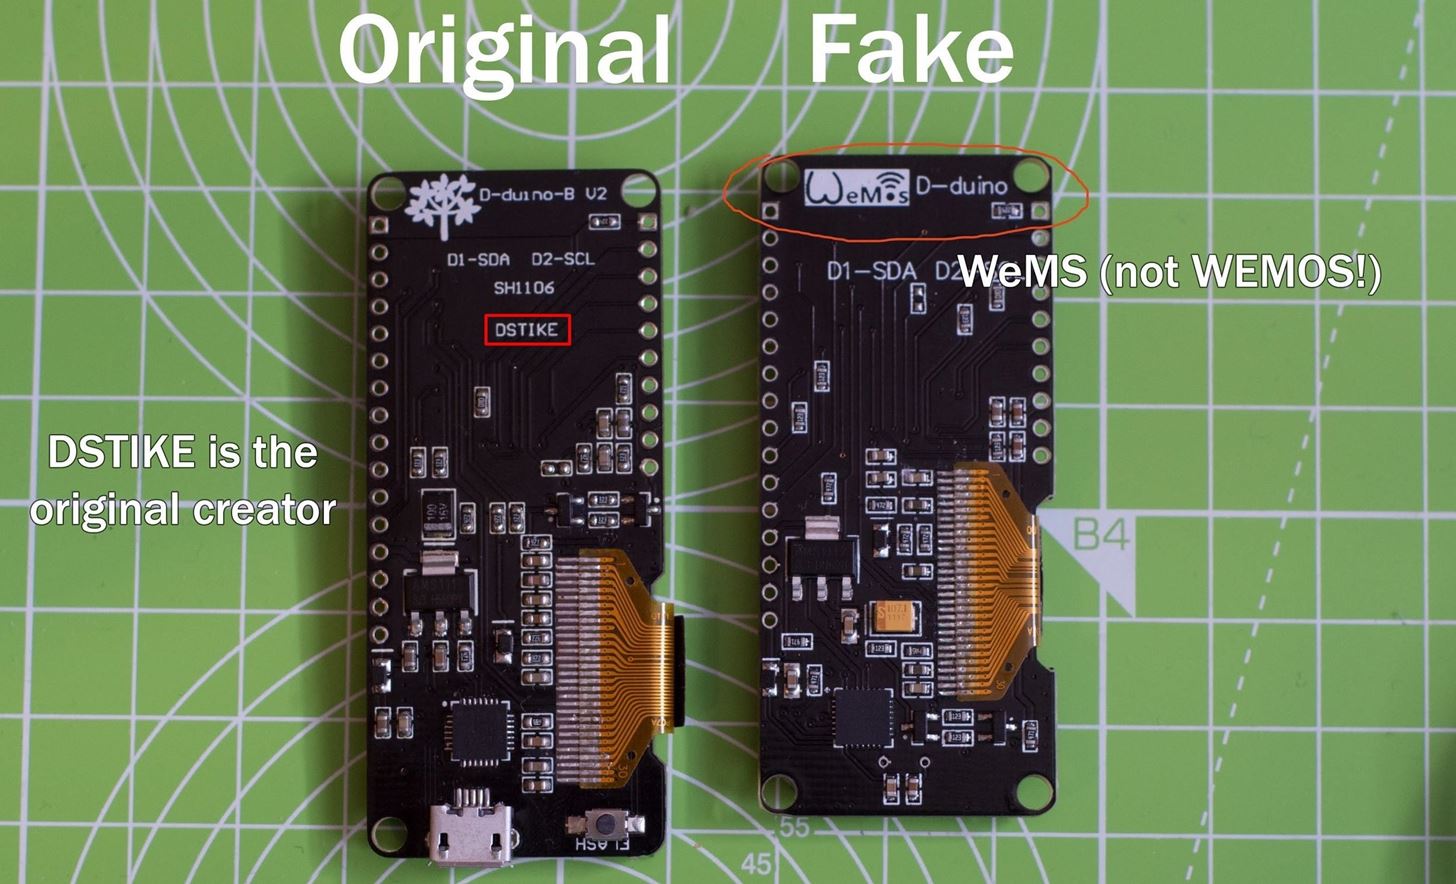 deauth & Ethical Hacking Tool-nodemcu WiFi Jammer SSID spam